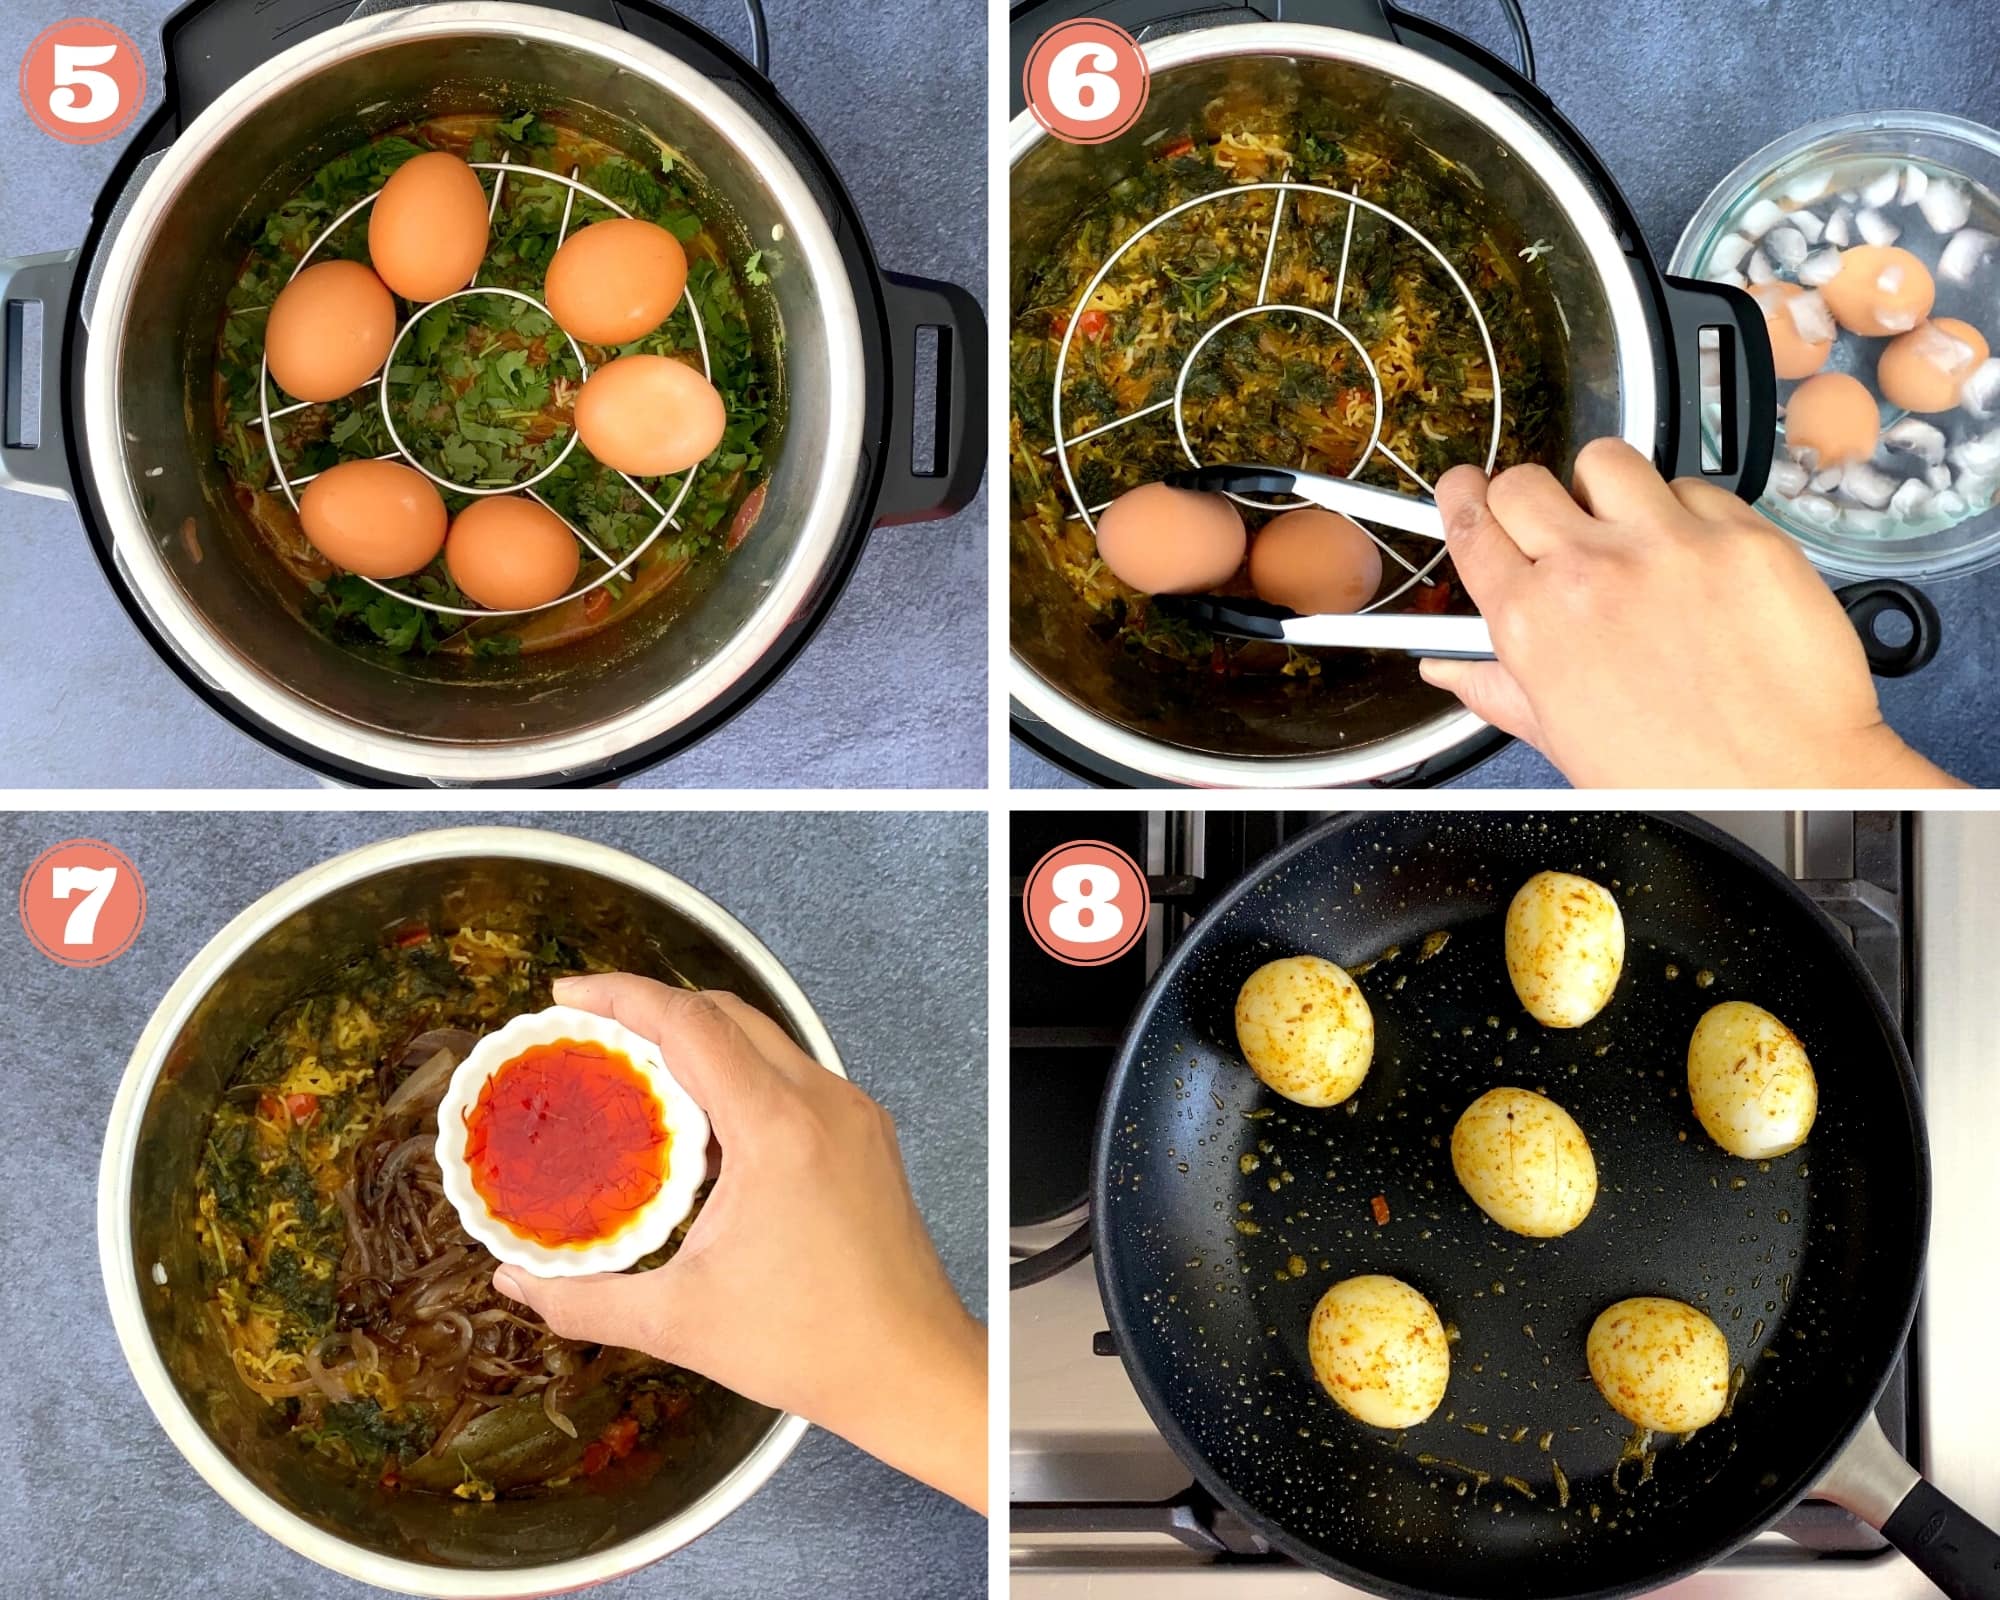 four steps showing eggs layered on top of rice, adding saffron liquid, then frying eggs in pan